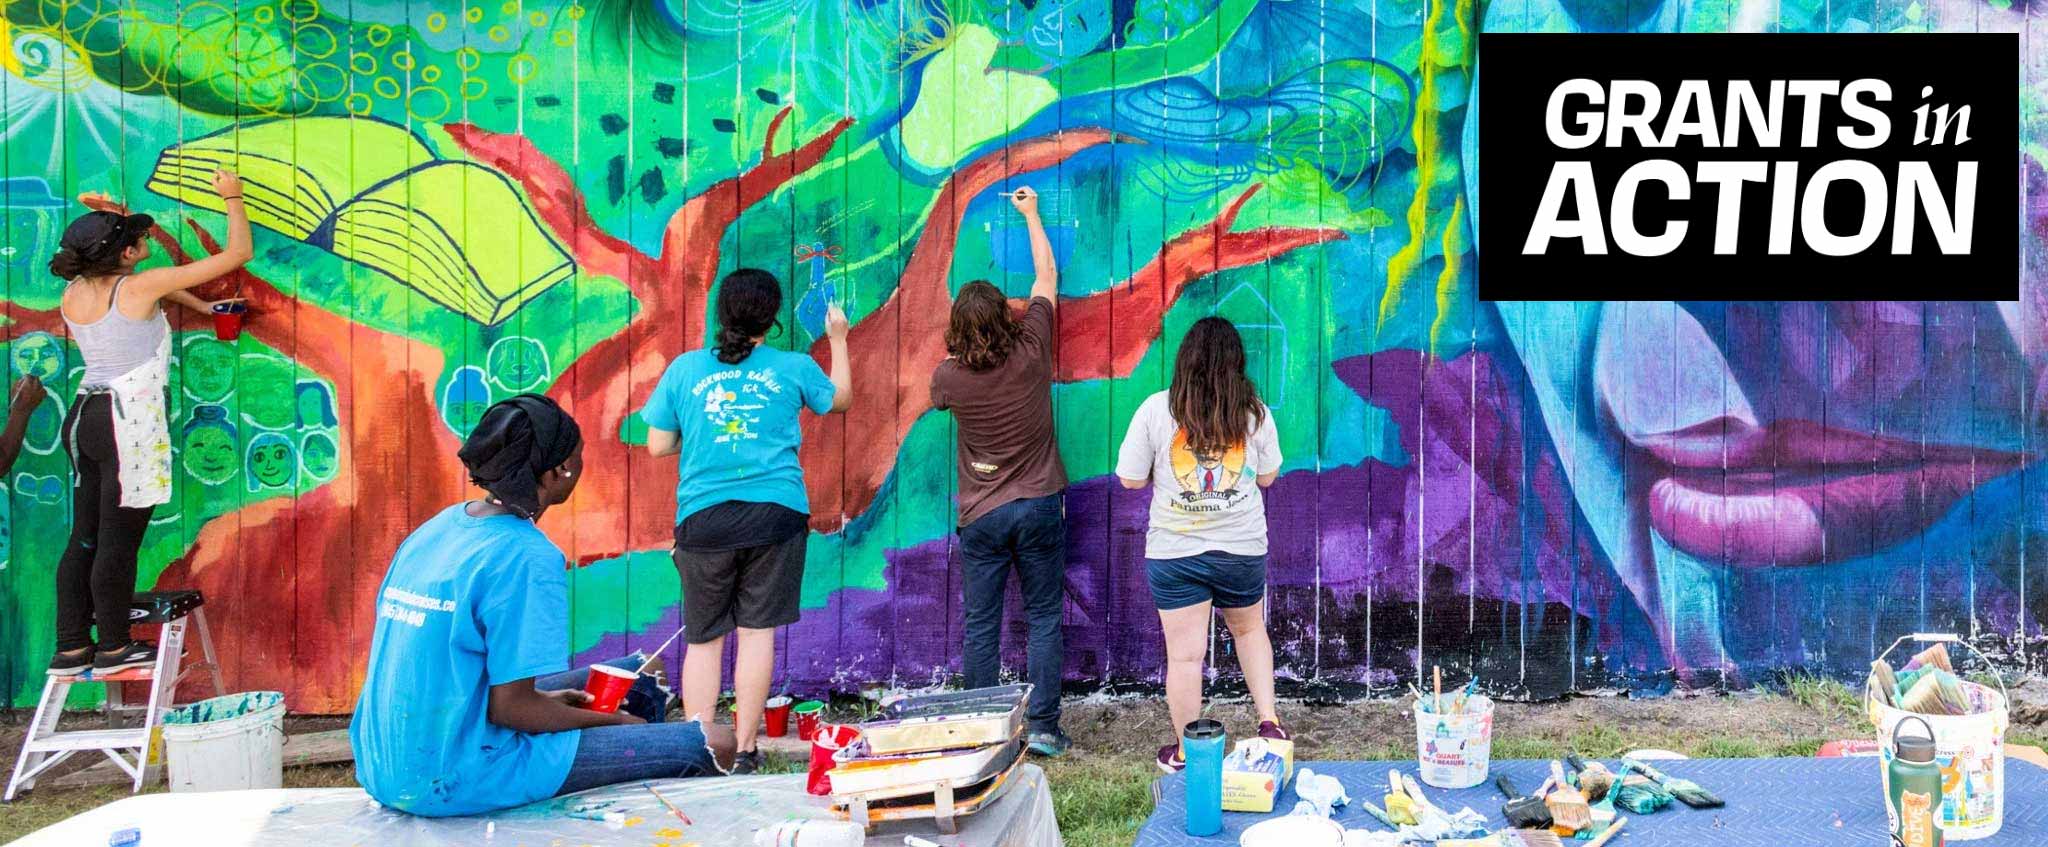 A group of people paint a brightly colored mural on the side of a building, backs facing the camera